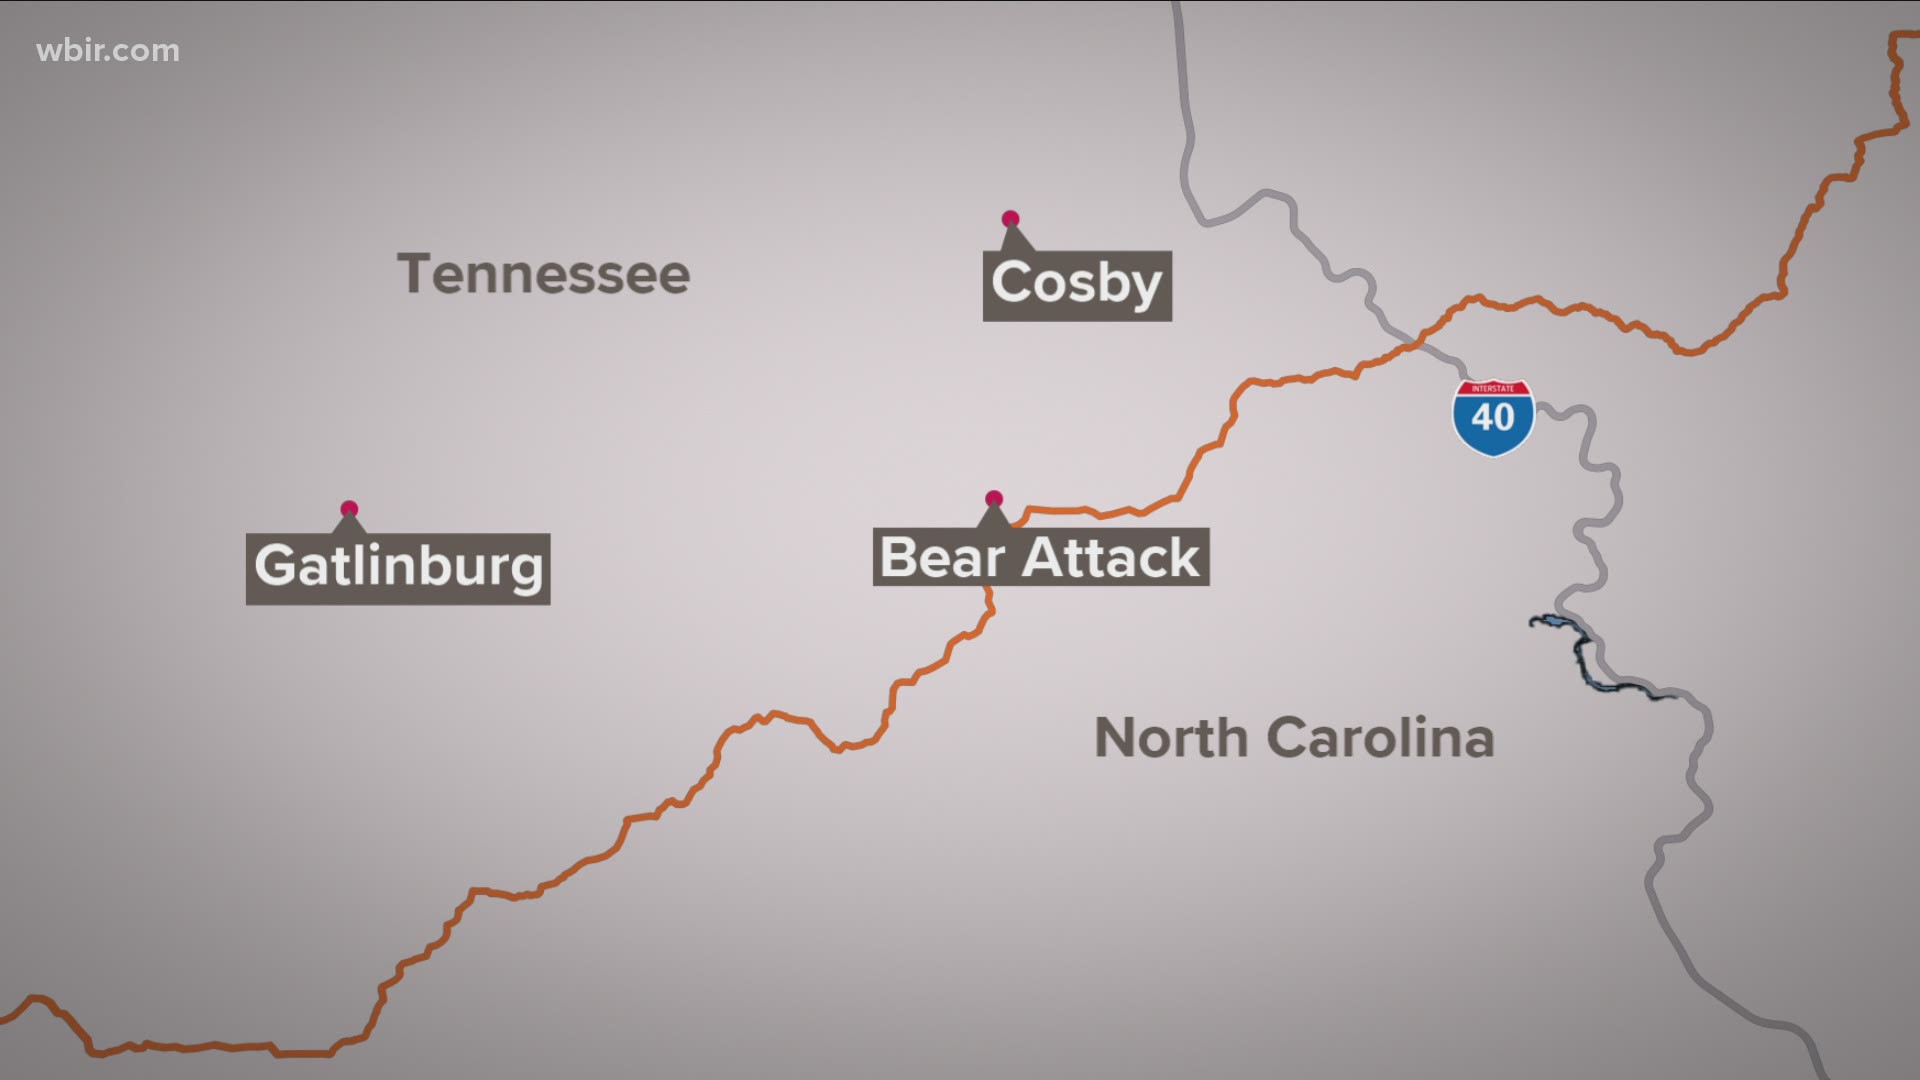 The girl and her family were at a backcountry campsite in the Great Smoky Mountains National Park when the bear attacked her. Rangers later killed the bear.